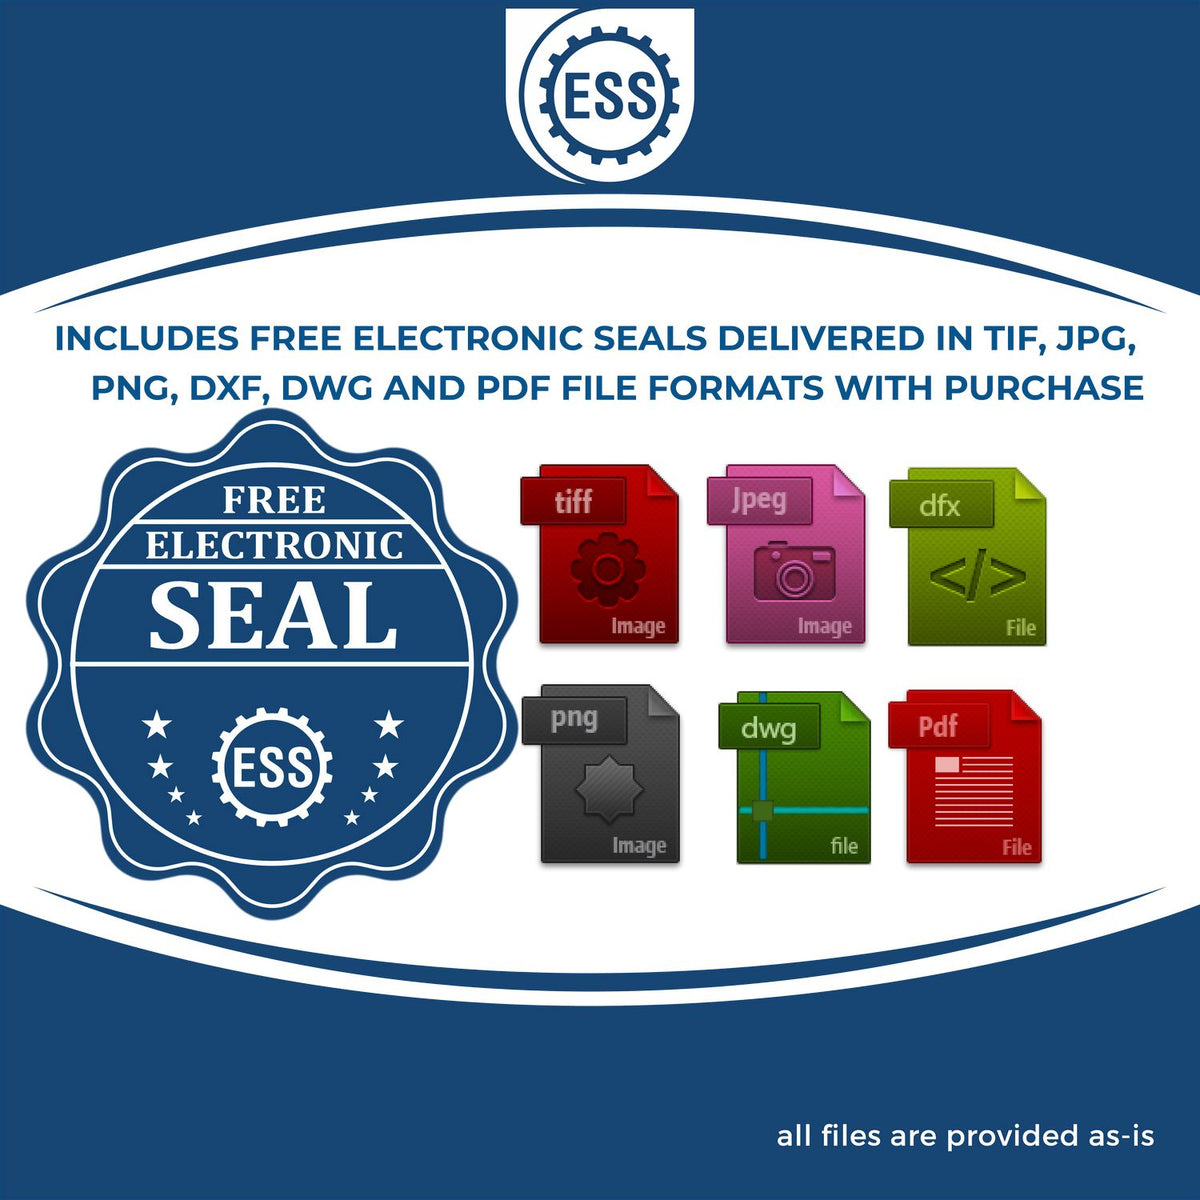 An infographic for the free electronic seal for the PSI Maryland Notary Stamp illustrating the different file type icons such as DXF, DWG, TIF, JPG and PNG.